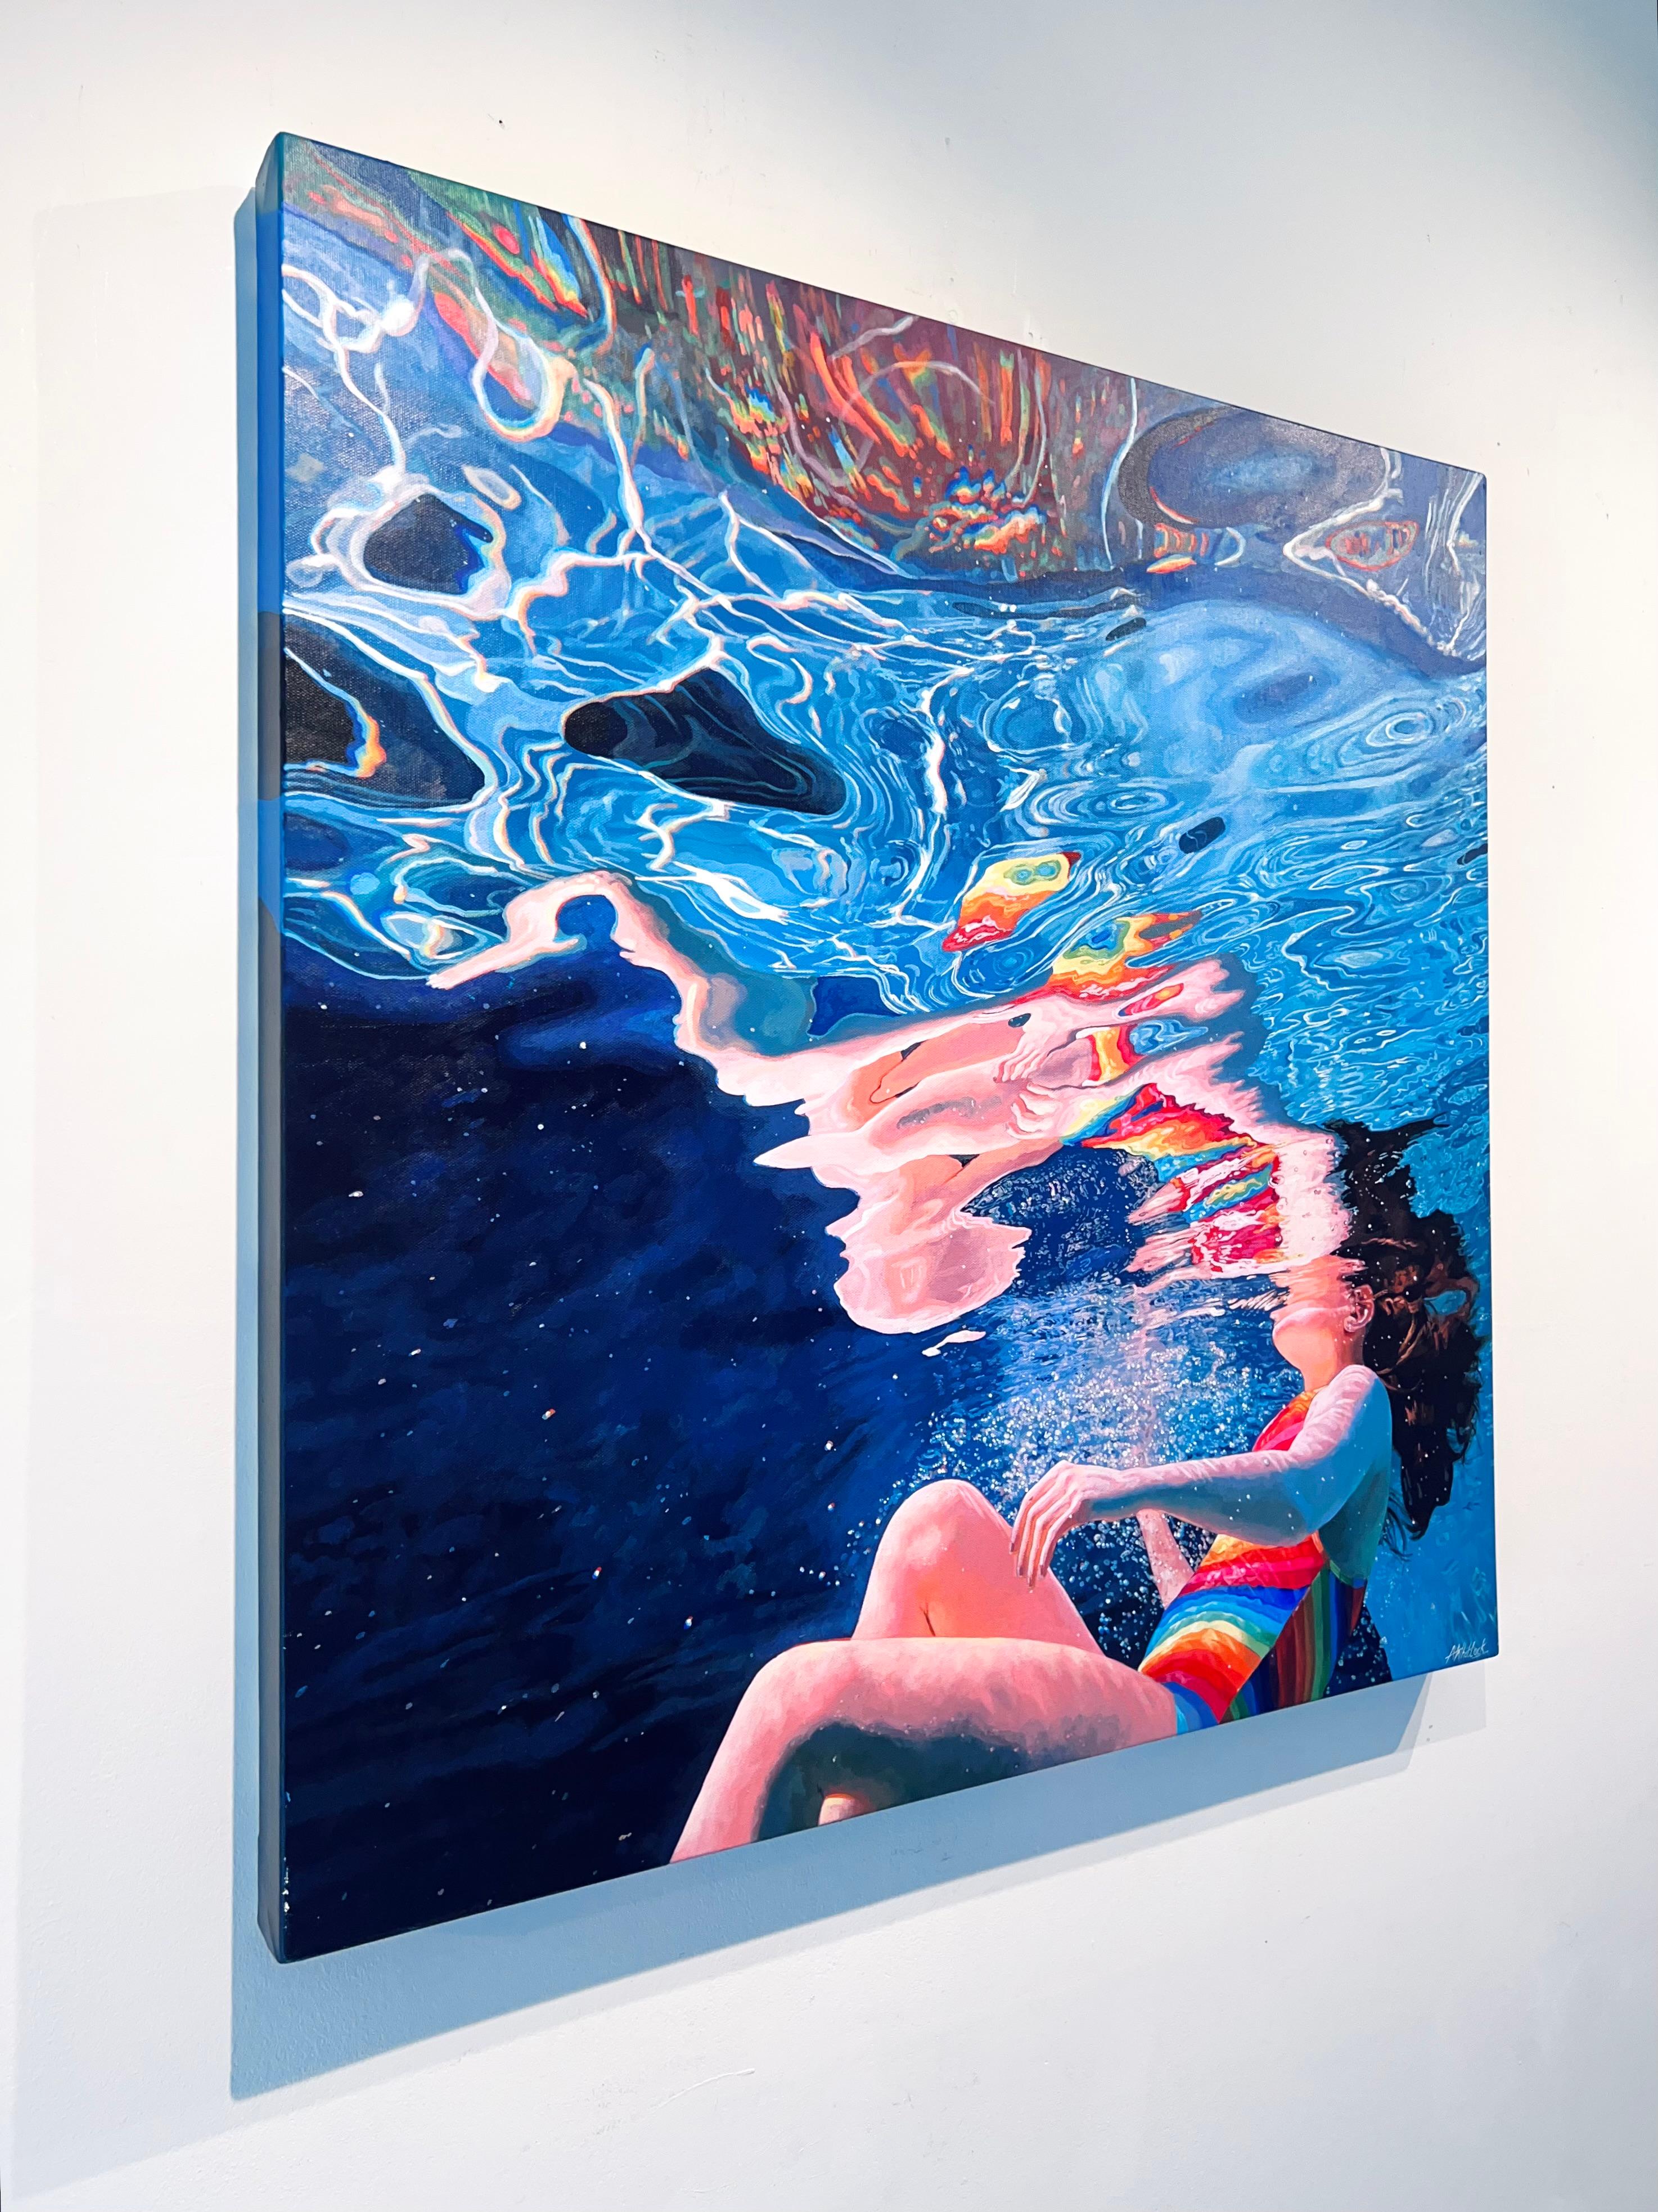 Origin-original hyperrealistic figurative waterscape painting-contemporary art  - Impressionist Painting by Abi Whitlock